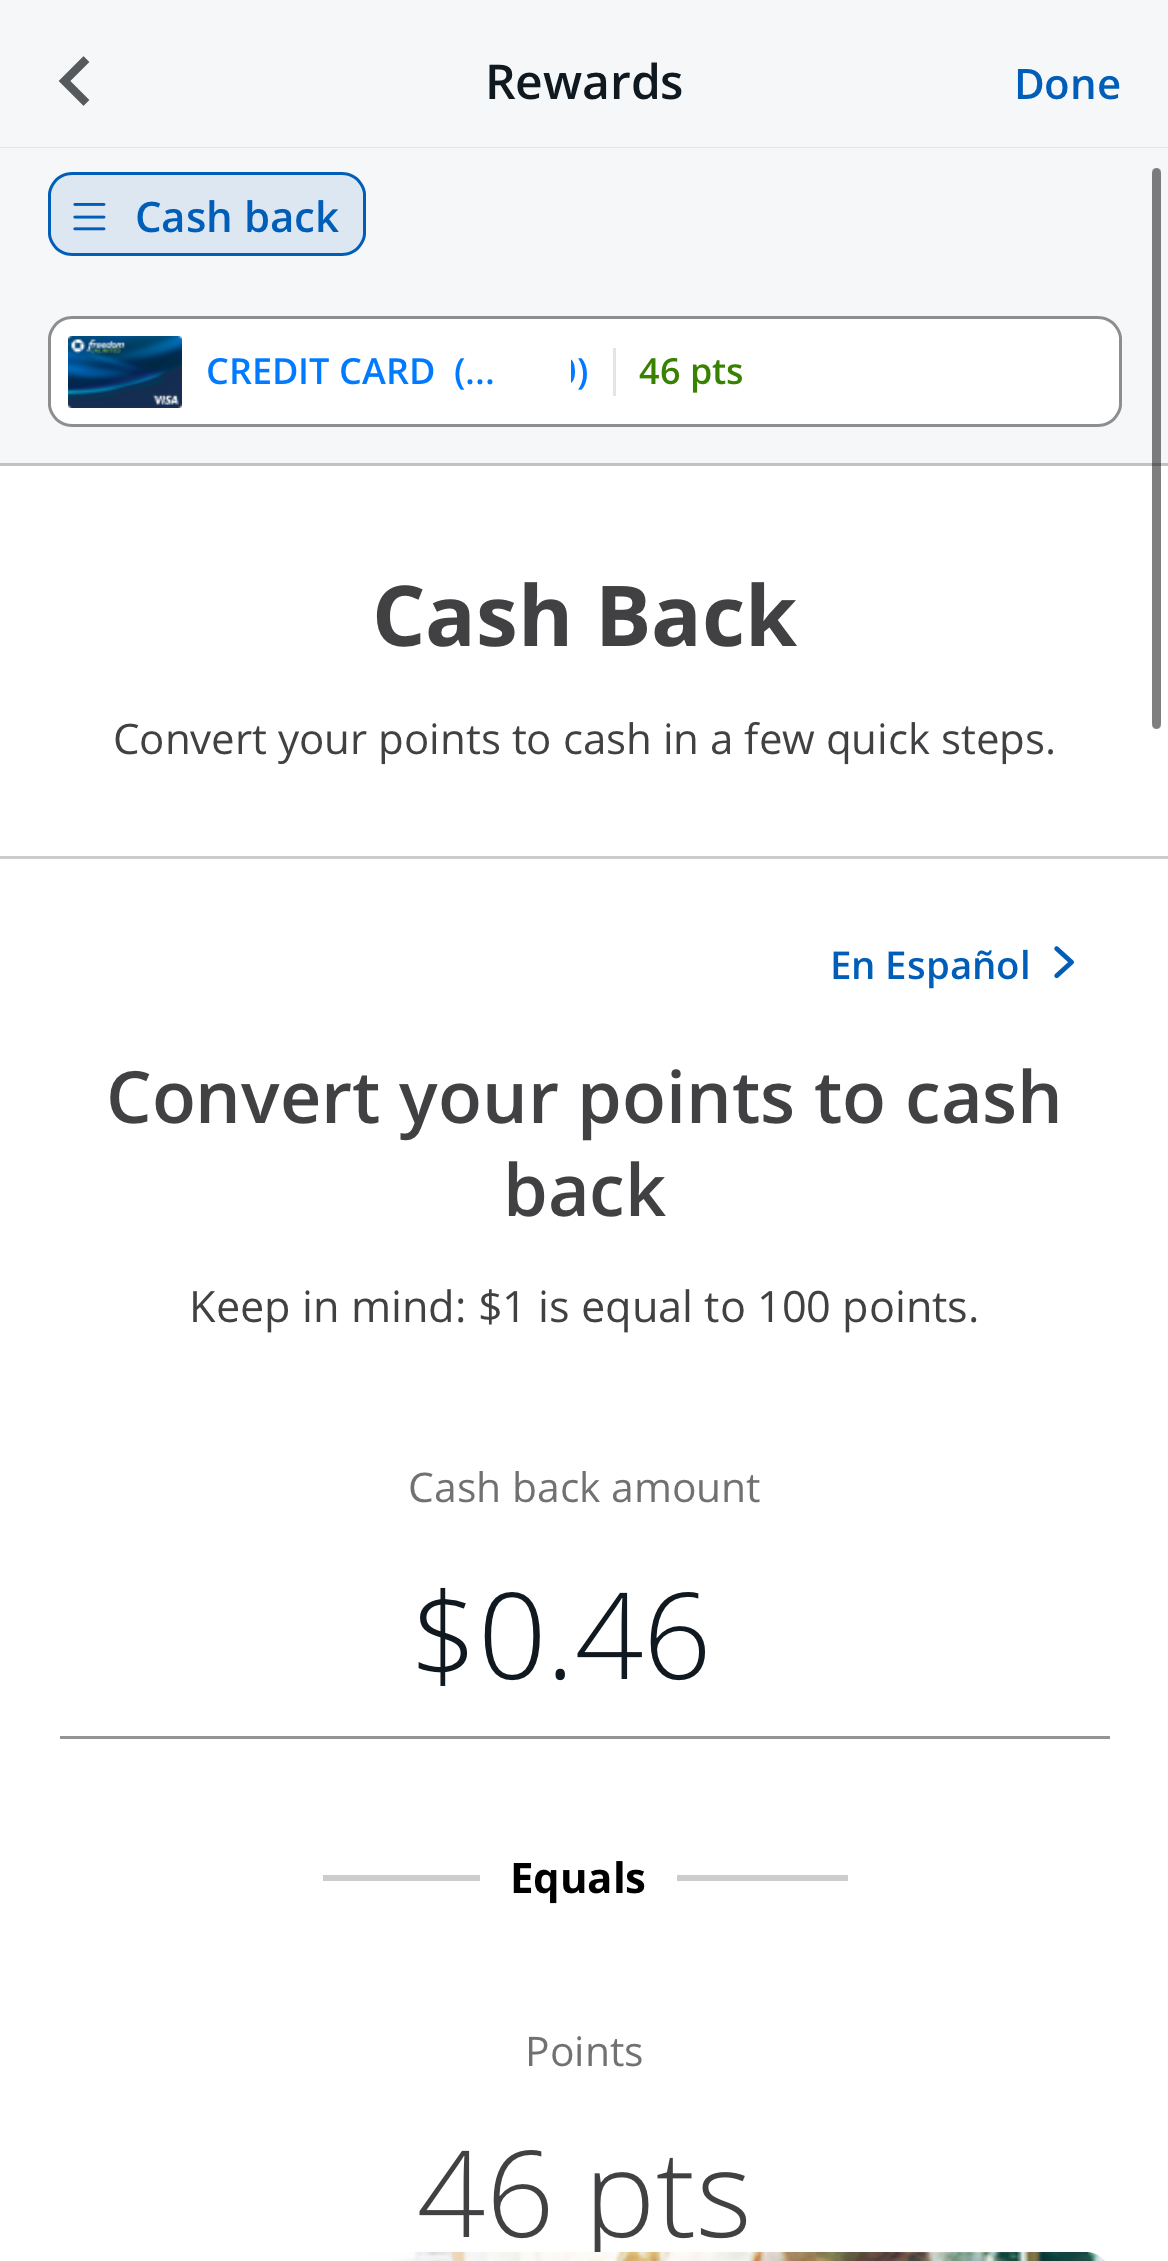 Chase Freedom Unlimited cash back status on app